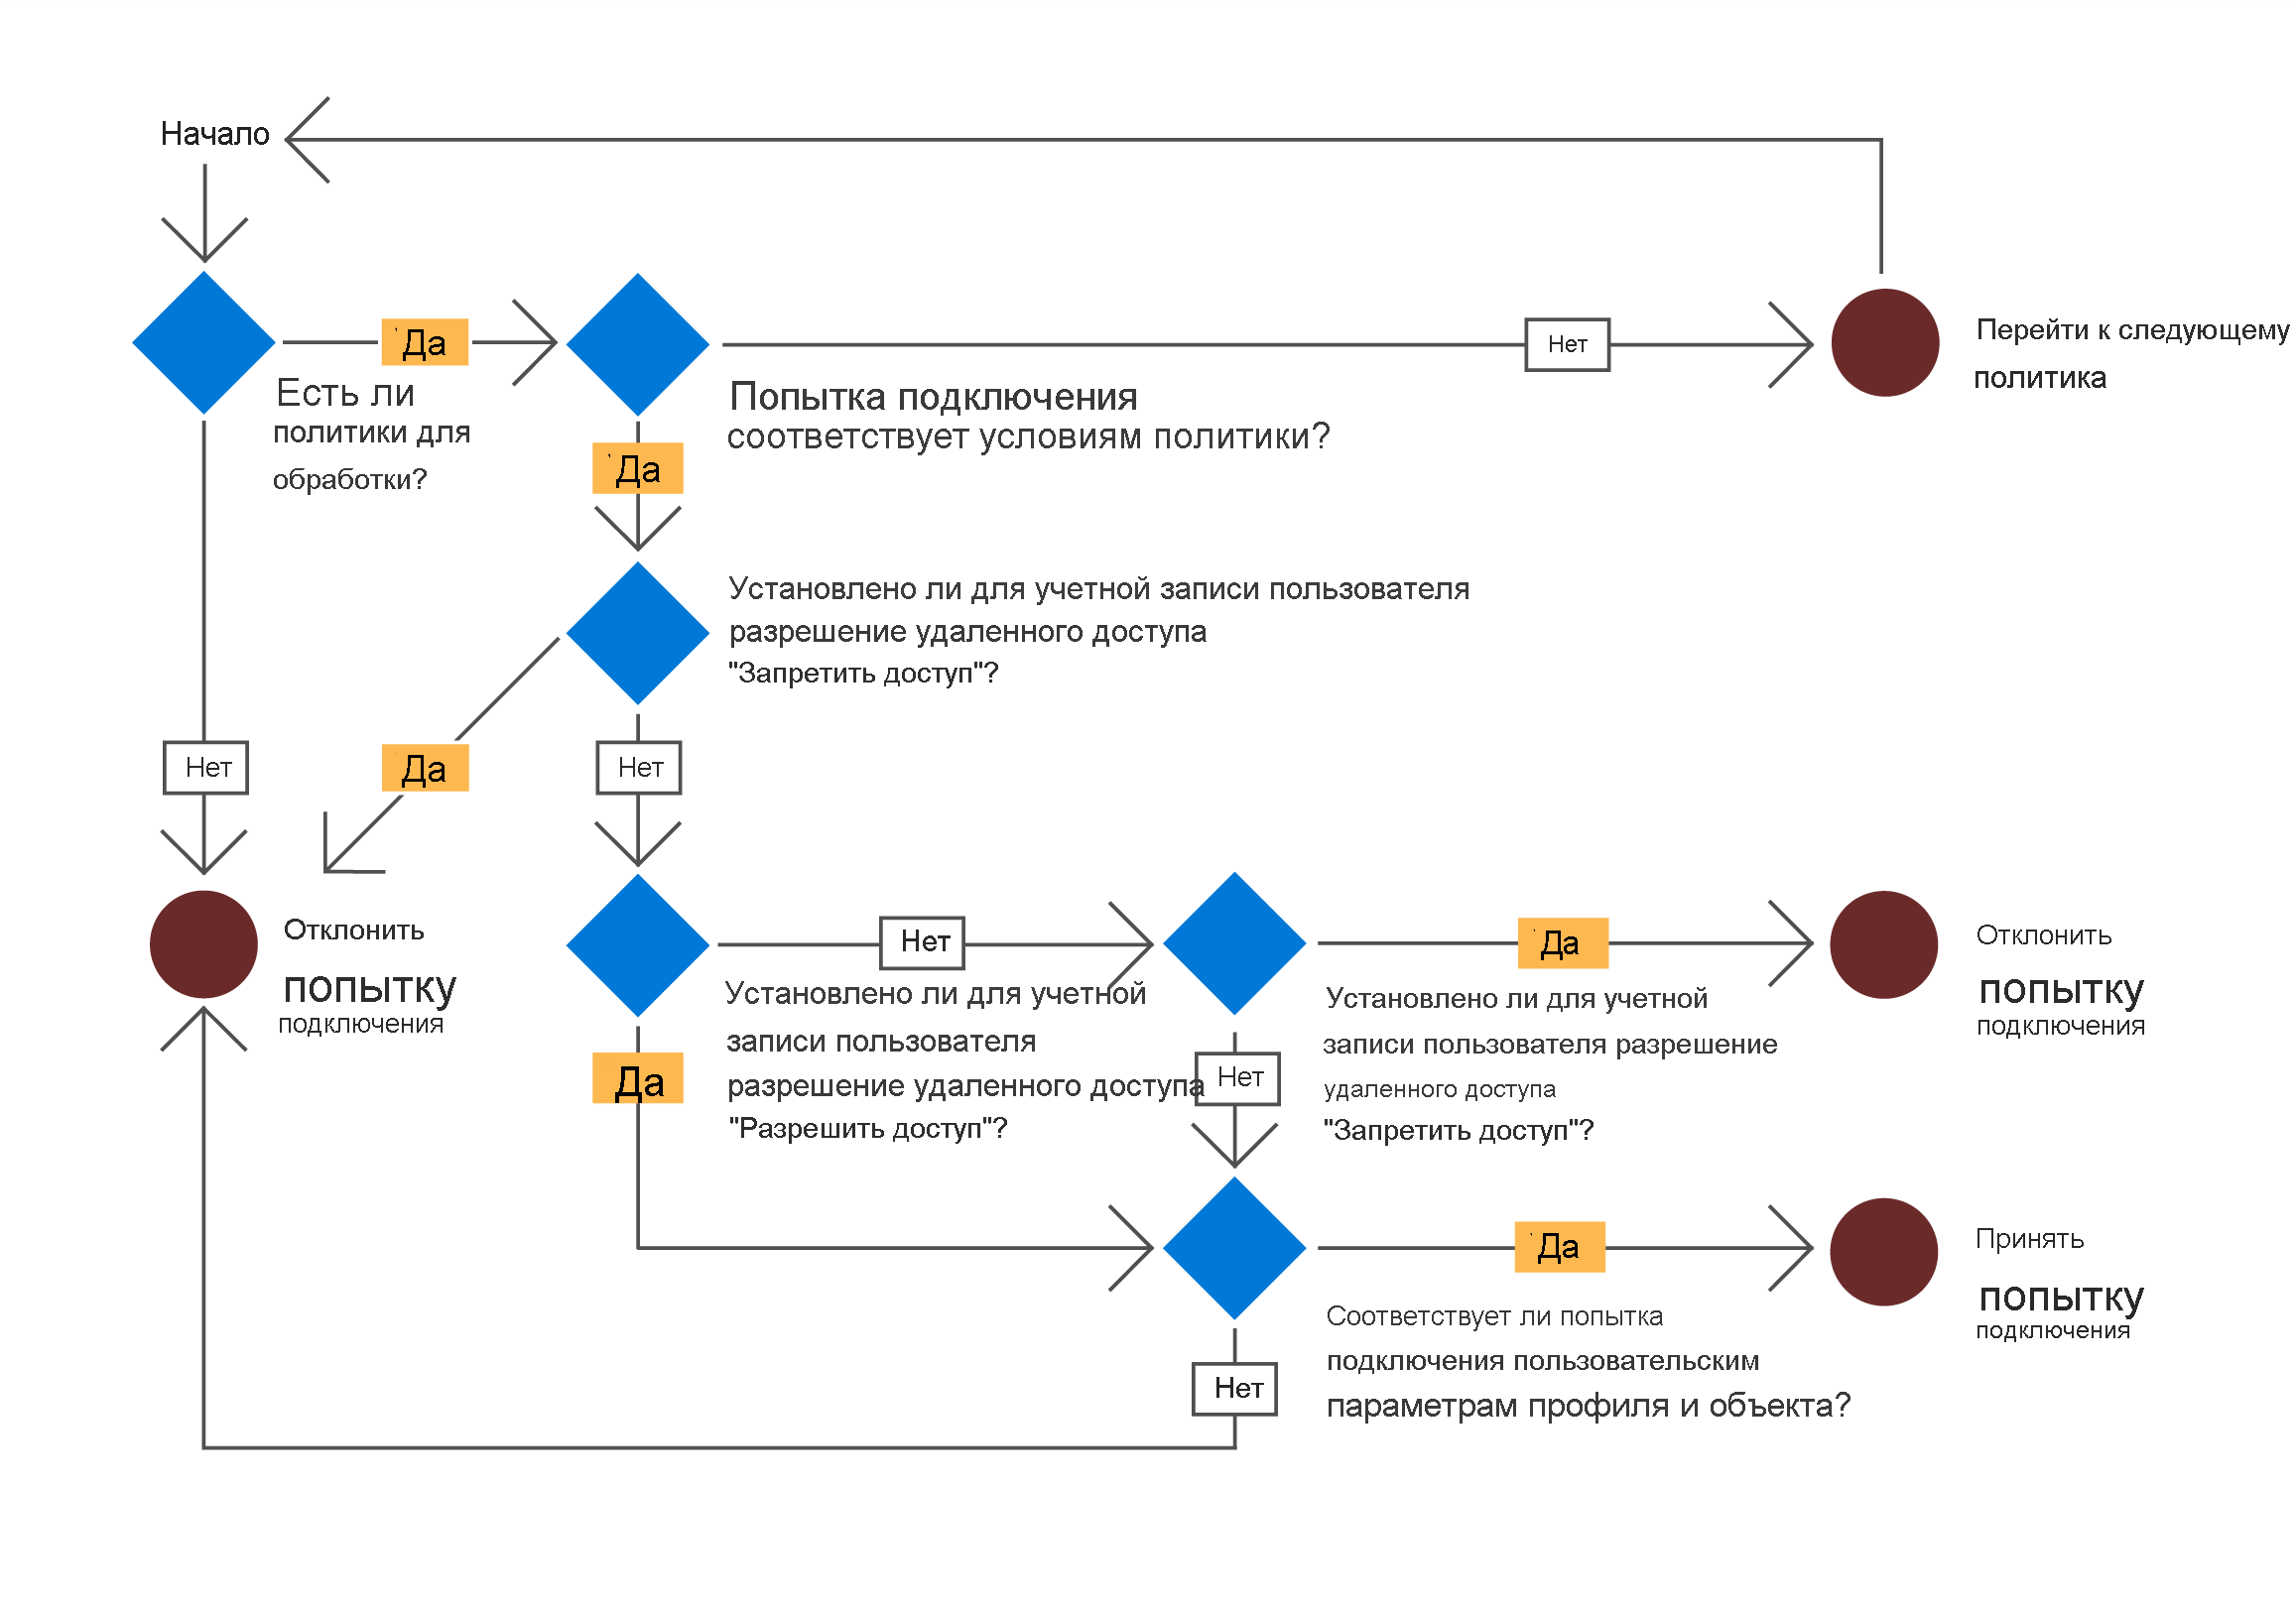 A diagram displays the flow process that NPS uses to determine user access based on policies.